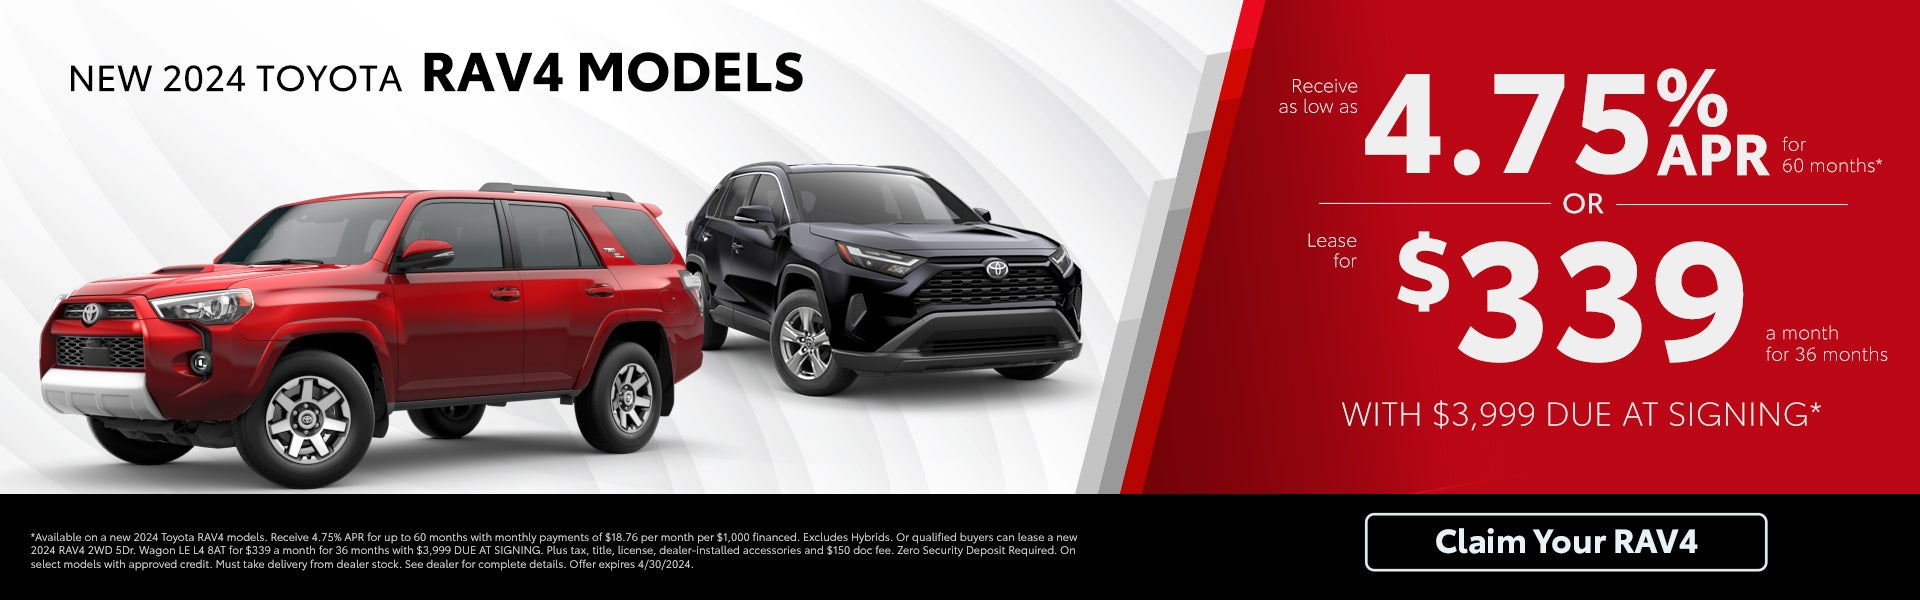 New 2024 Toyota RAV4 APR and Lease Offer Fort Worth TX 